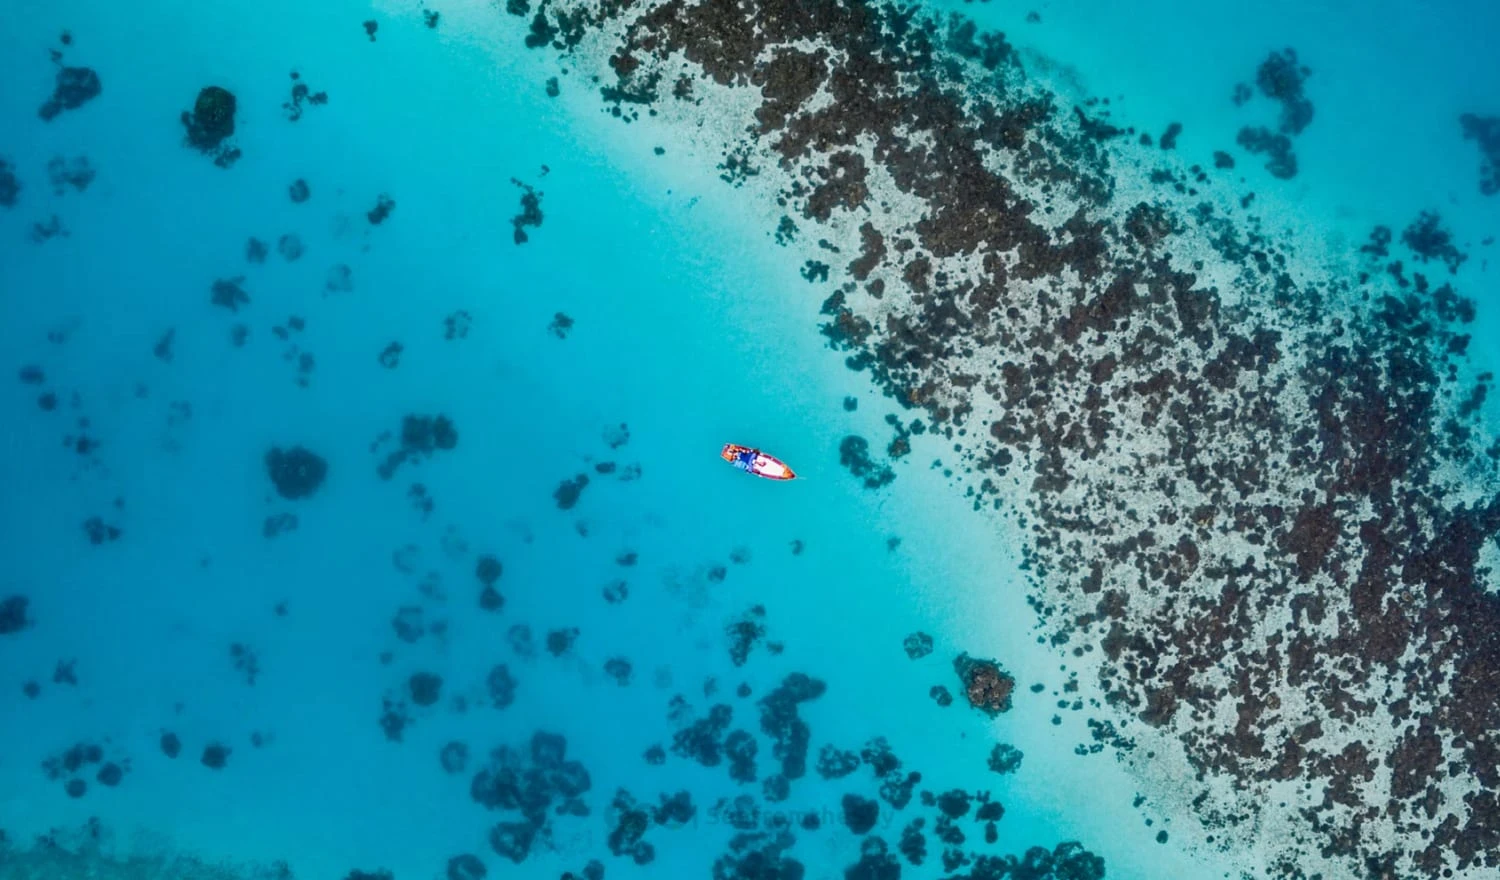 A person paddle boarding on a beautiful reef